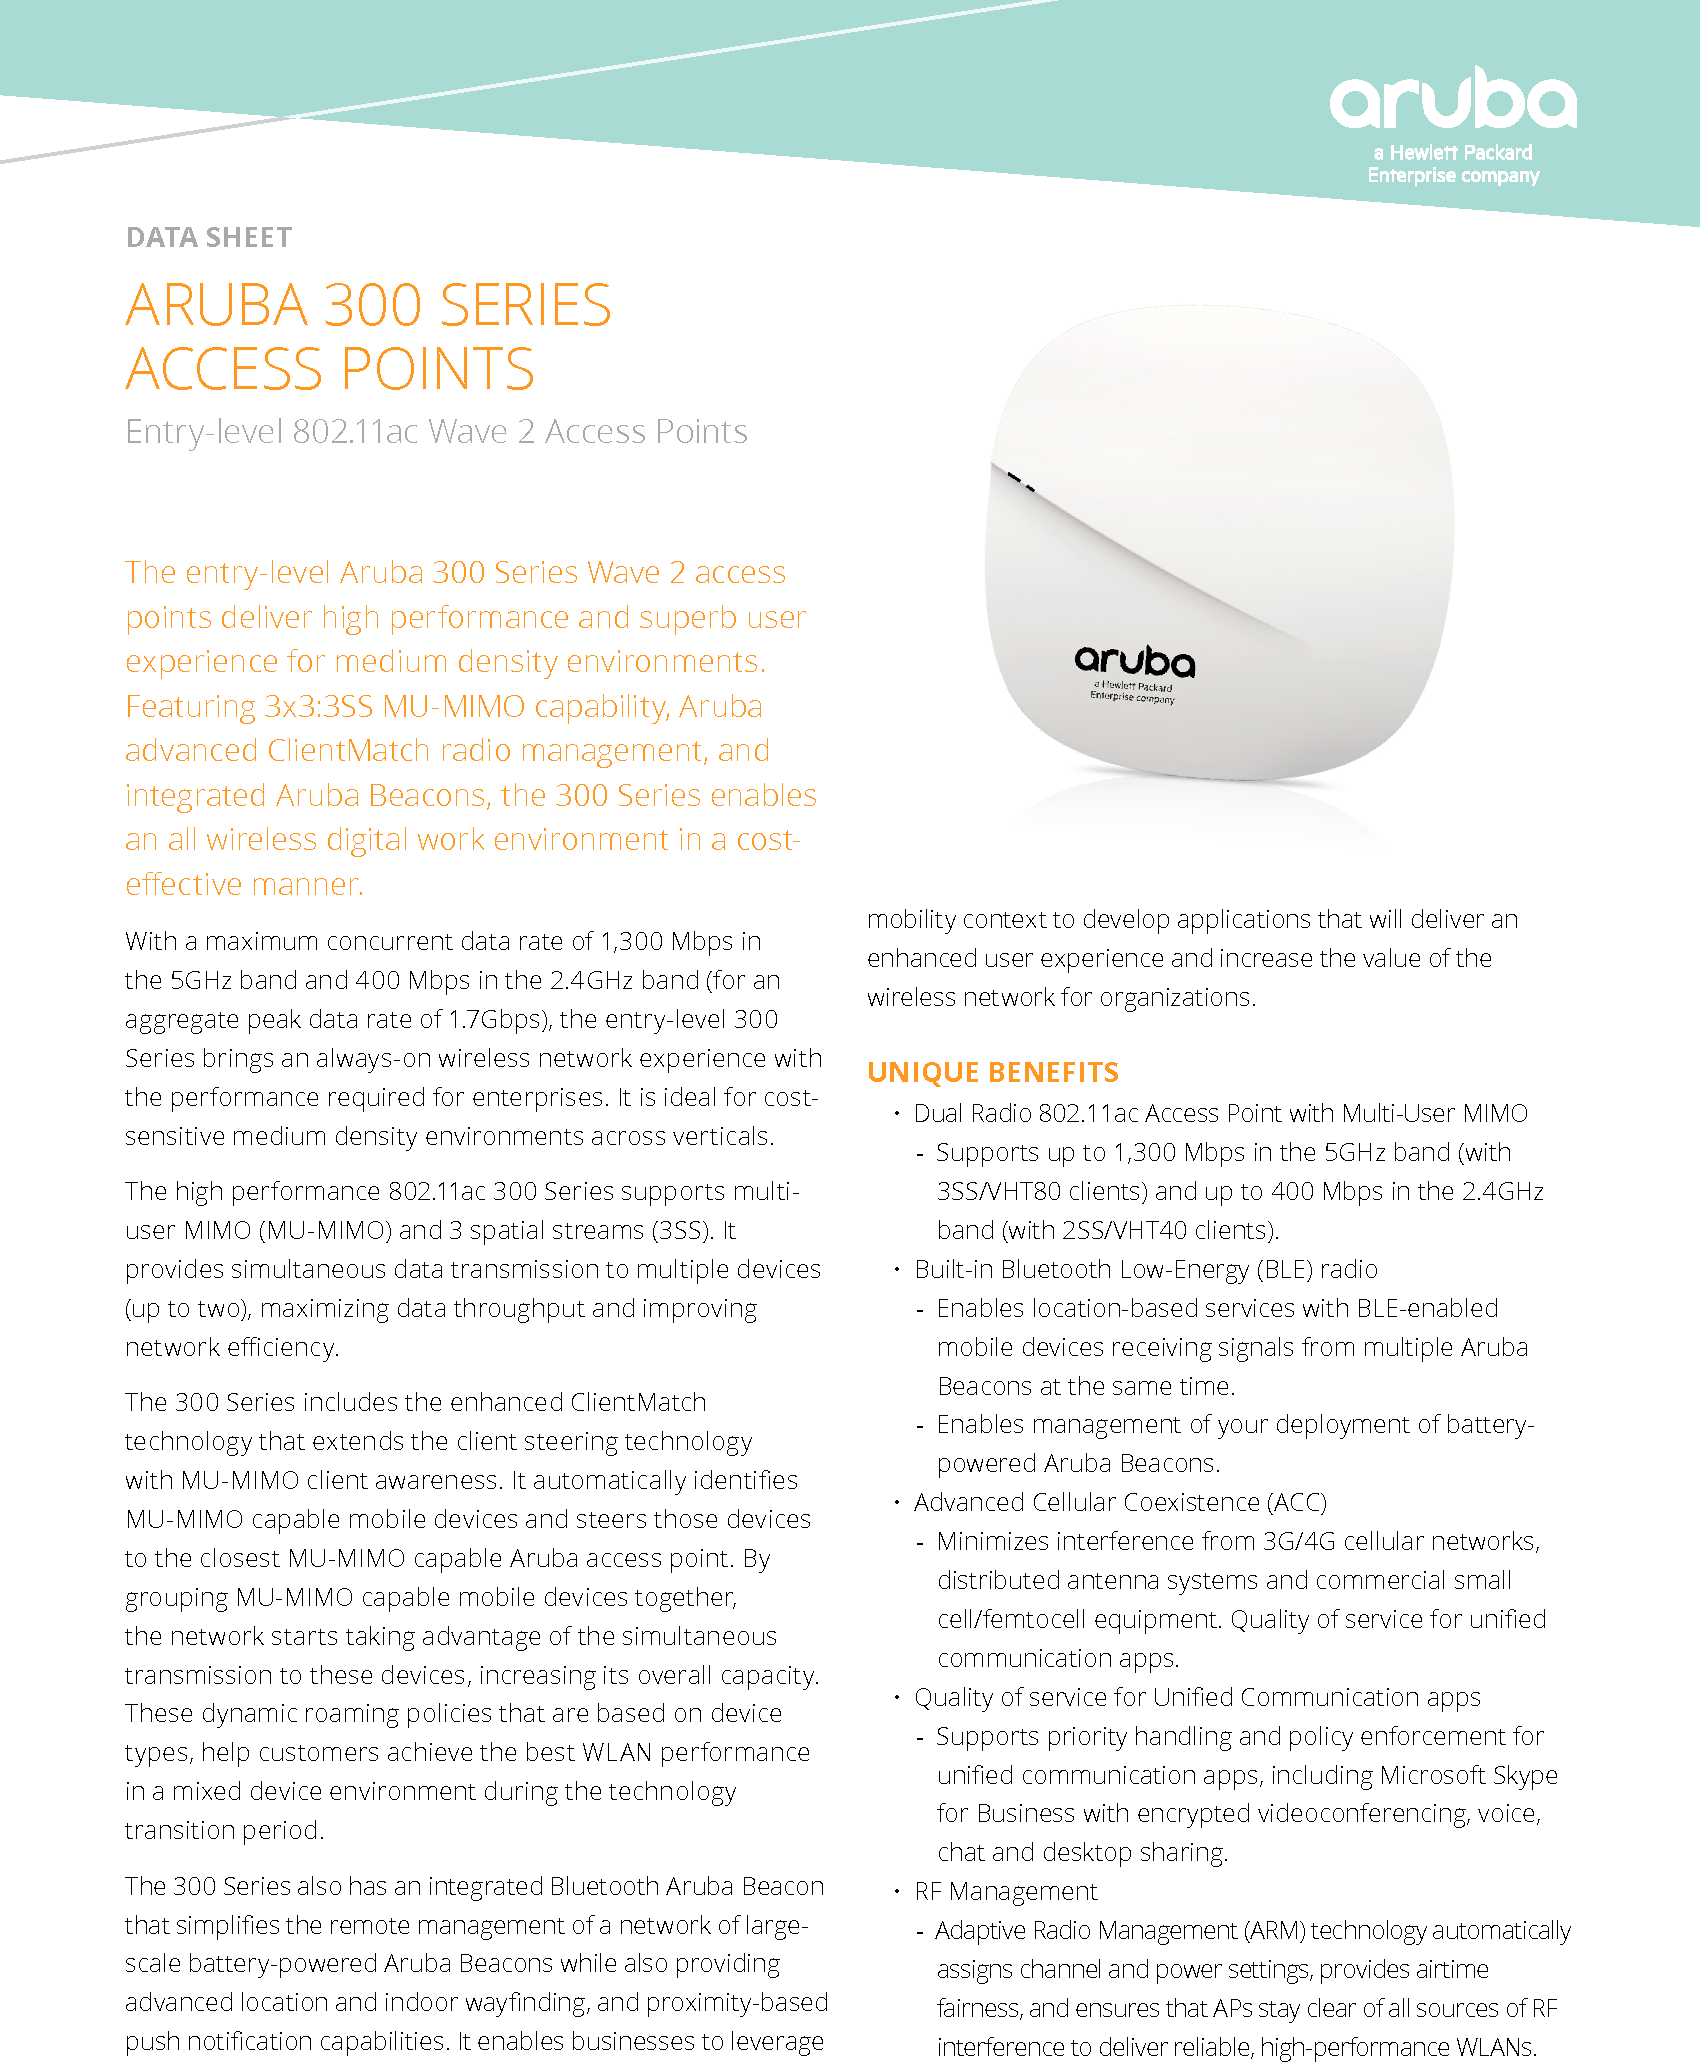 DATA SHEETThe entry-level Aruba 300 Series Wave 2 access points deliver high performance and superb user experience for medium density environments. Featuring 3x3:3SS MU-MIMO capability, Aruba advanced ClientMatch radio management, and integrated Aruba Beacons, the 300 Series enables an all wireless digital work environment in a cost-eective manner.With a maximum concurrent data rate of 1,300 Mbps in the 5GHz band and 400 Mbps in the 2.4GHz band (for an aggregate peak data rate of 1.7Gbps), the entry-level 300 Series brings an always-on wireless network experience with the performance required for enterprises. It is ideal for cost-sensitive medium density environments across verticals.   The high performance 802.11ac 300 Series supports multi-user MIMO (MU-MIMO) and 3 spatial streams (3SS). It provides simultaneous data transmission to multiple devices (up to two), maximizing data throughput and improving network eciency.The 300 Series includes the enhanced ClientMatch technology that extends the client steering technology with MU-MIMO client awareness. It automatically identies MU-MIMO capable mobile devices and steers those devices to the closest MU-MIMO capable Aruba access point. By grouping MU-MIMO capable mobile devices together, the network starts taking advantage of the simultaneous transmission to these devices, increasing its overall capacity. These dynamic roaming policies that are based on device types, help customers achieve the best WLAN performance in a mixed device environment during the technology transition period.The 300 Series also has an integrated Bluetooth Aruba Beacon that simplies the remote management of a network of large-scale battery-powered Aruba Beacons while also providing advanced location and indoor waynding, and proximity-based push notication capabilities. It enables businesses to leverage ARUBA 300 SERIES  ACCESS POINTSEntry-level 802.11ac Wave 2 Access Points mobility context to develop applications that will deliver an enhanced user experience and increase the value of the wireless network for organizations.UNIQUE BENEFITS• Dual Radio 802.11ac Access Point with Multi-User MIMO -Supports up to 1,300 Mbps in the 5GHz band (with  3SS/VHT80 clients) and up to 400 Mbps in the 2.4GHz band (with 2SS/VHT40 clients).• Built-in Bluetooth Low-Energy (BLE) radio -Enables location-based services with BLE-enabled mobile devices receiving signals from multiple Aruba Beacons at the same time. -Enables management of your deployment of battery-powered Aruba Beacons.• Advanced Cellular Coexistence (ACC)  -Minimizes interference from 3G/4G cellular networks, distributed antenna systems and commercial small cell/femtocell equipment. Quality of service for unied communication apps. • Quality of service for Unied Communication apps  -Supports priority handling and policy enforcement for unied communication apps, including Microsoft Skype for Business with encrypted videoconferencing, voice, chat and desktop sharing.• RF Management -Adaptive Radio Management (ARM) technology automatically assigns channel and power settings, provides airtime fairness, and ensures that APs stay clear of all sources of RF interference to deliver reliable, high-performance WLANs.